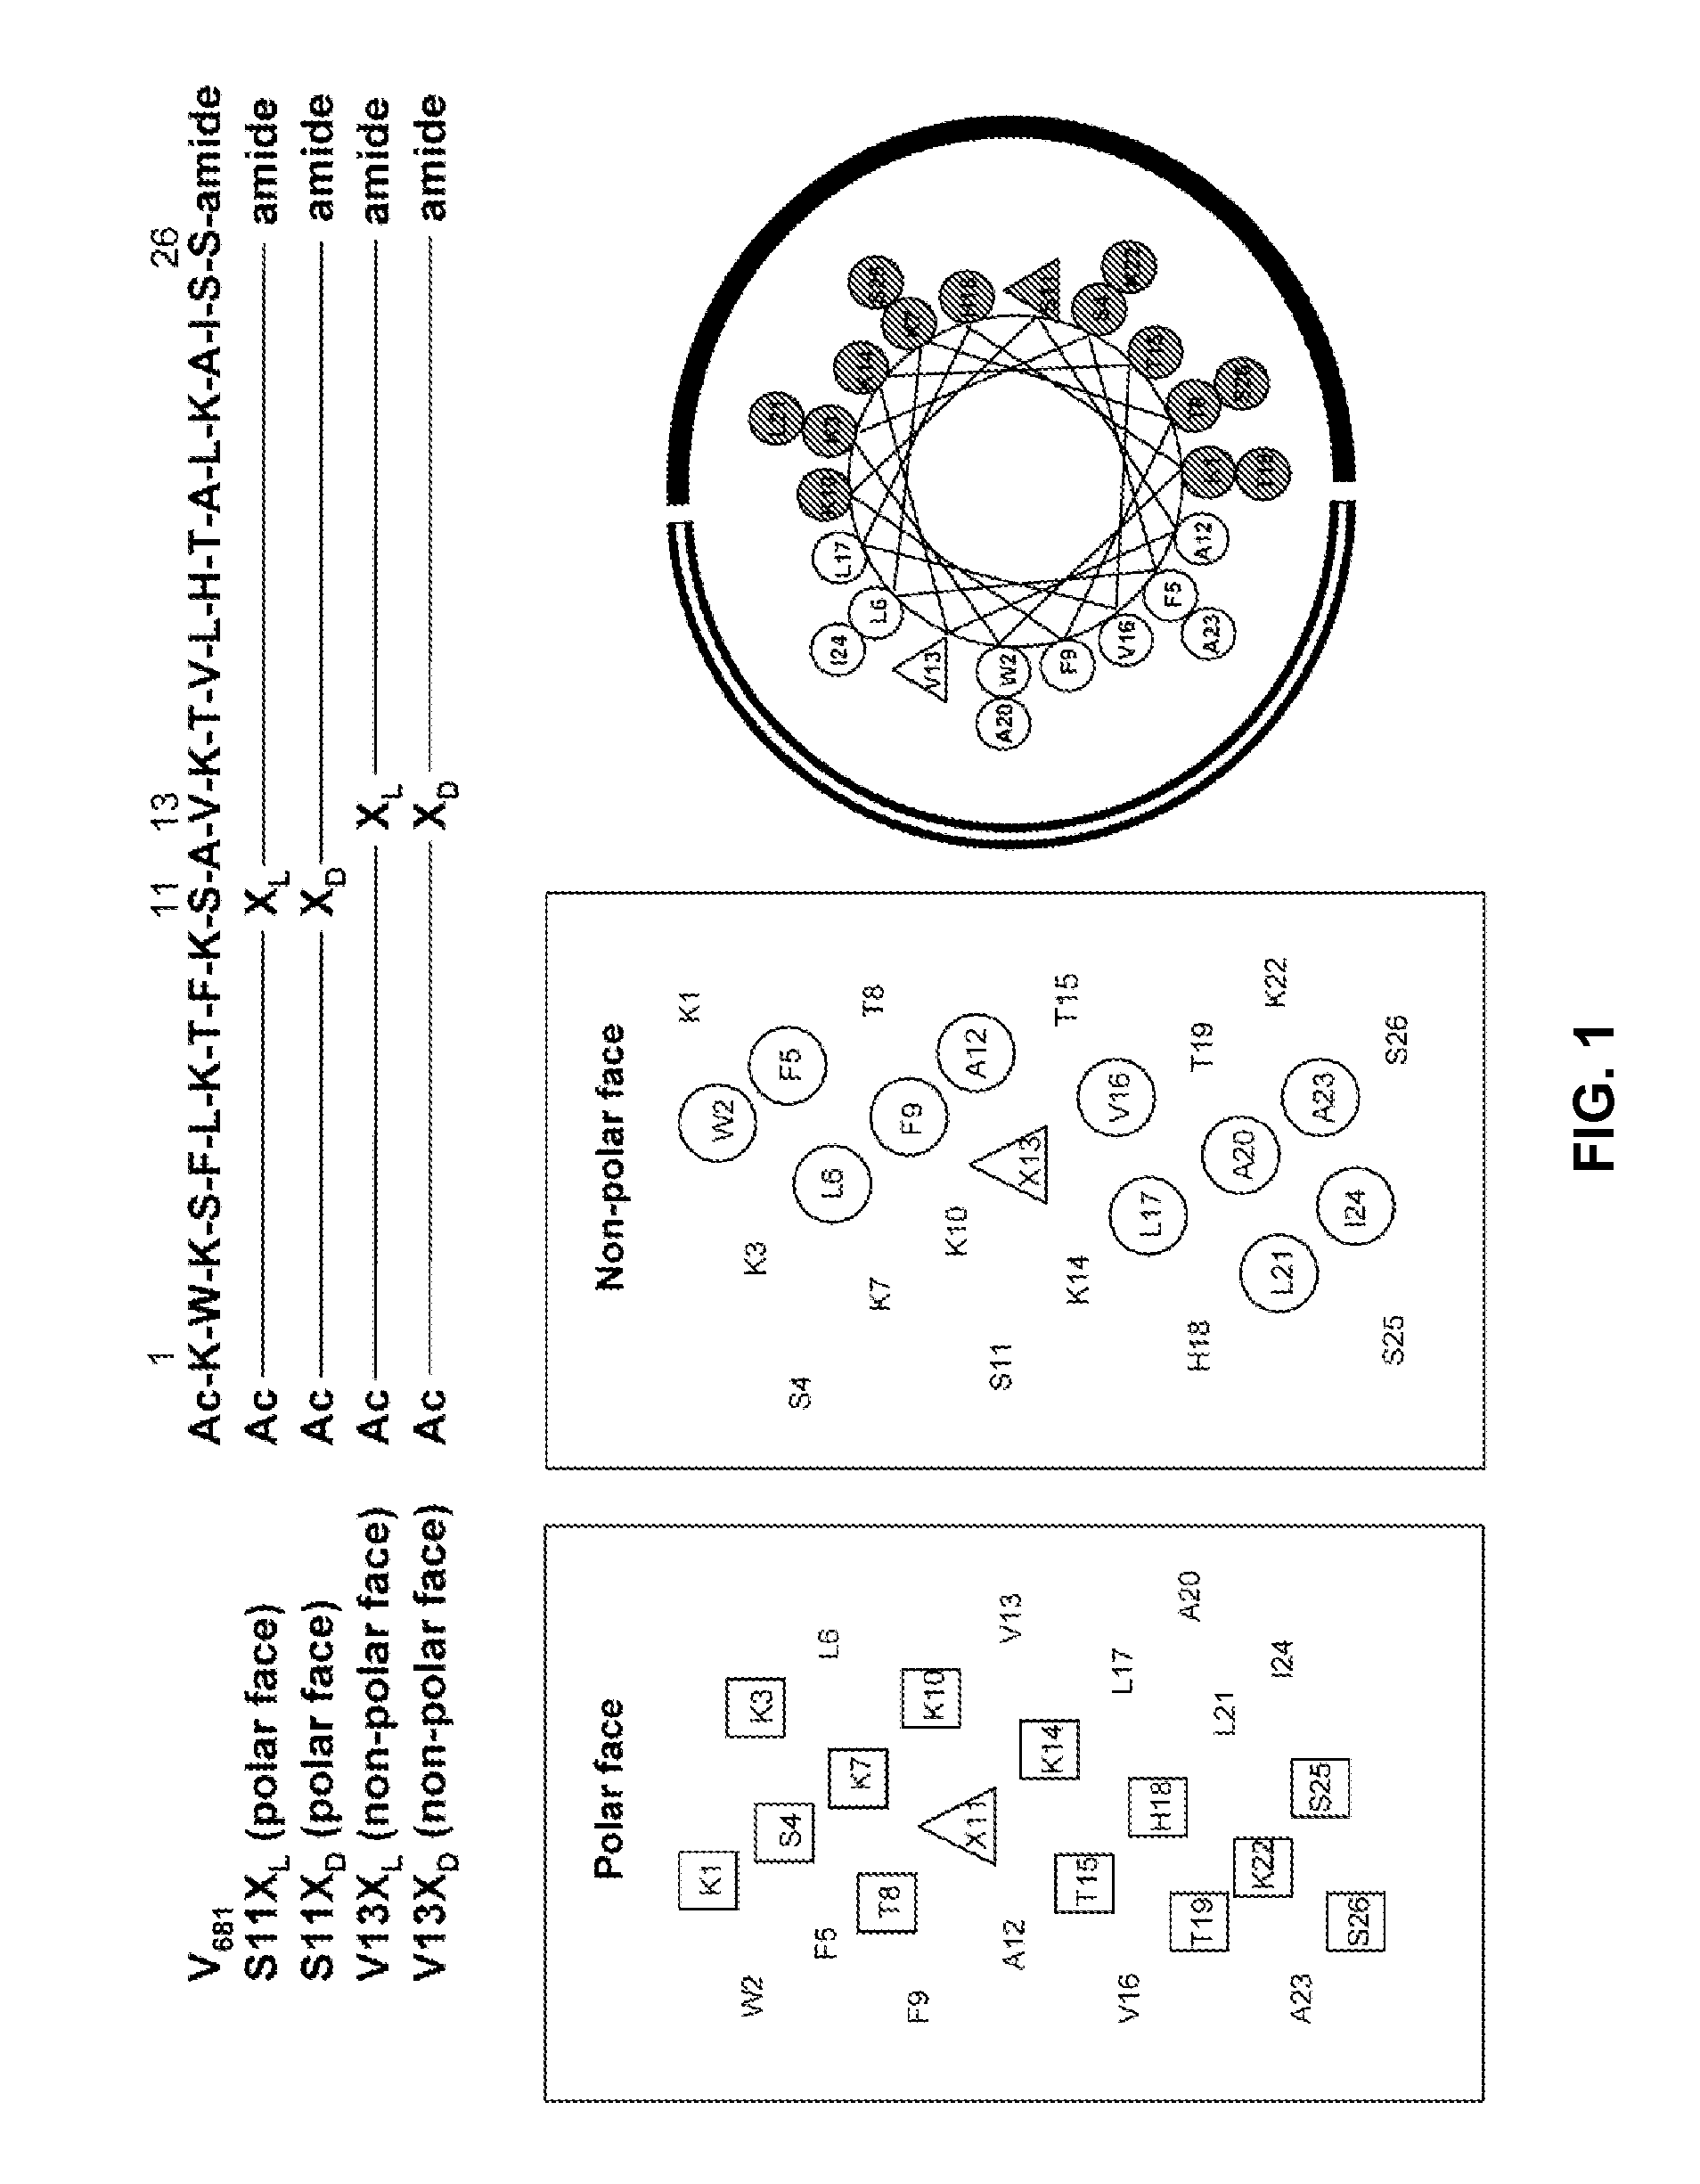 Antimicrobial Peptides and Methods of Use